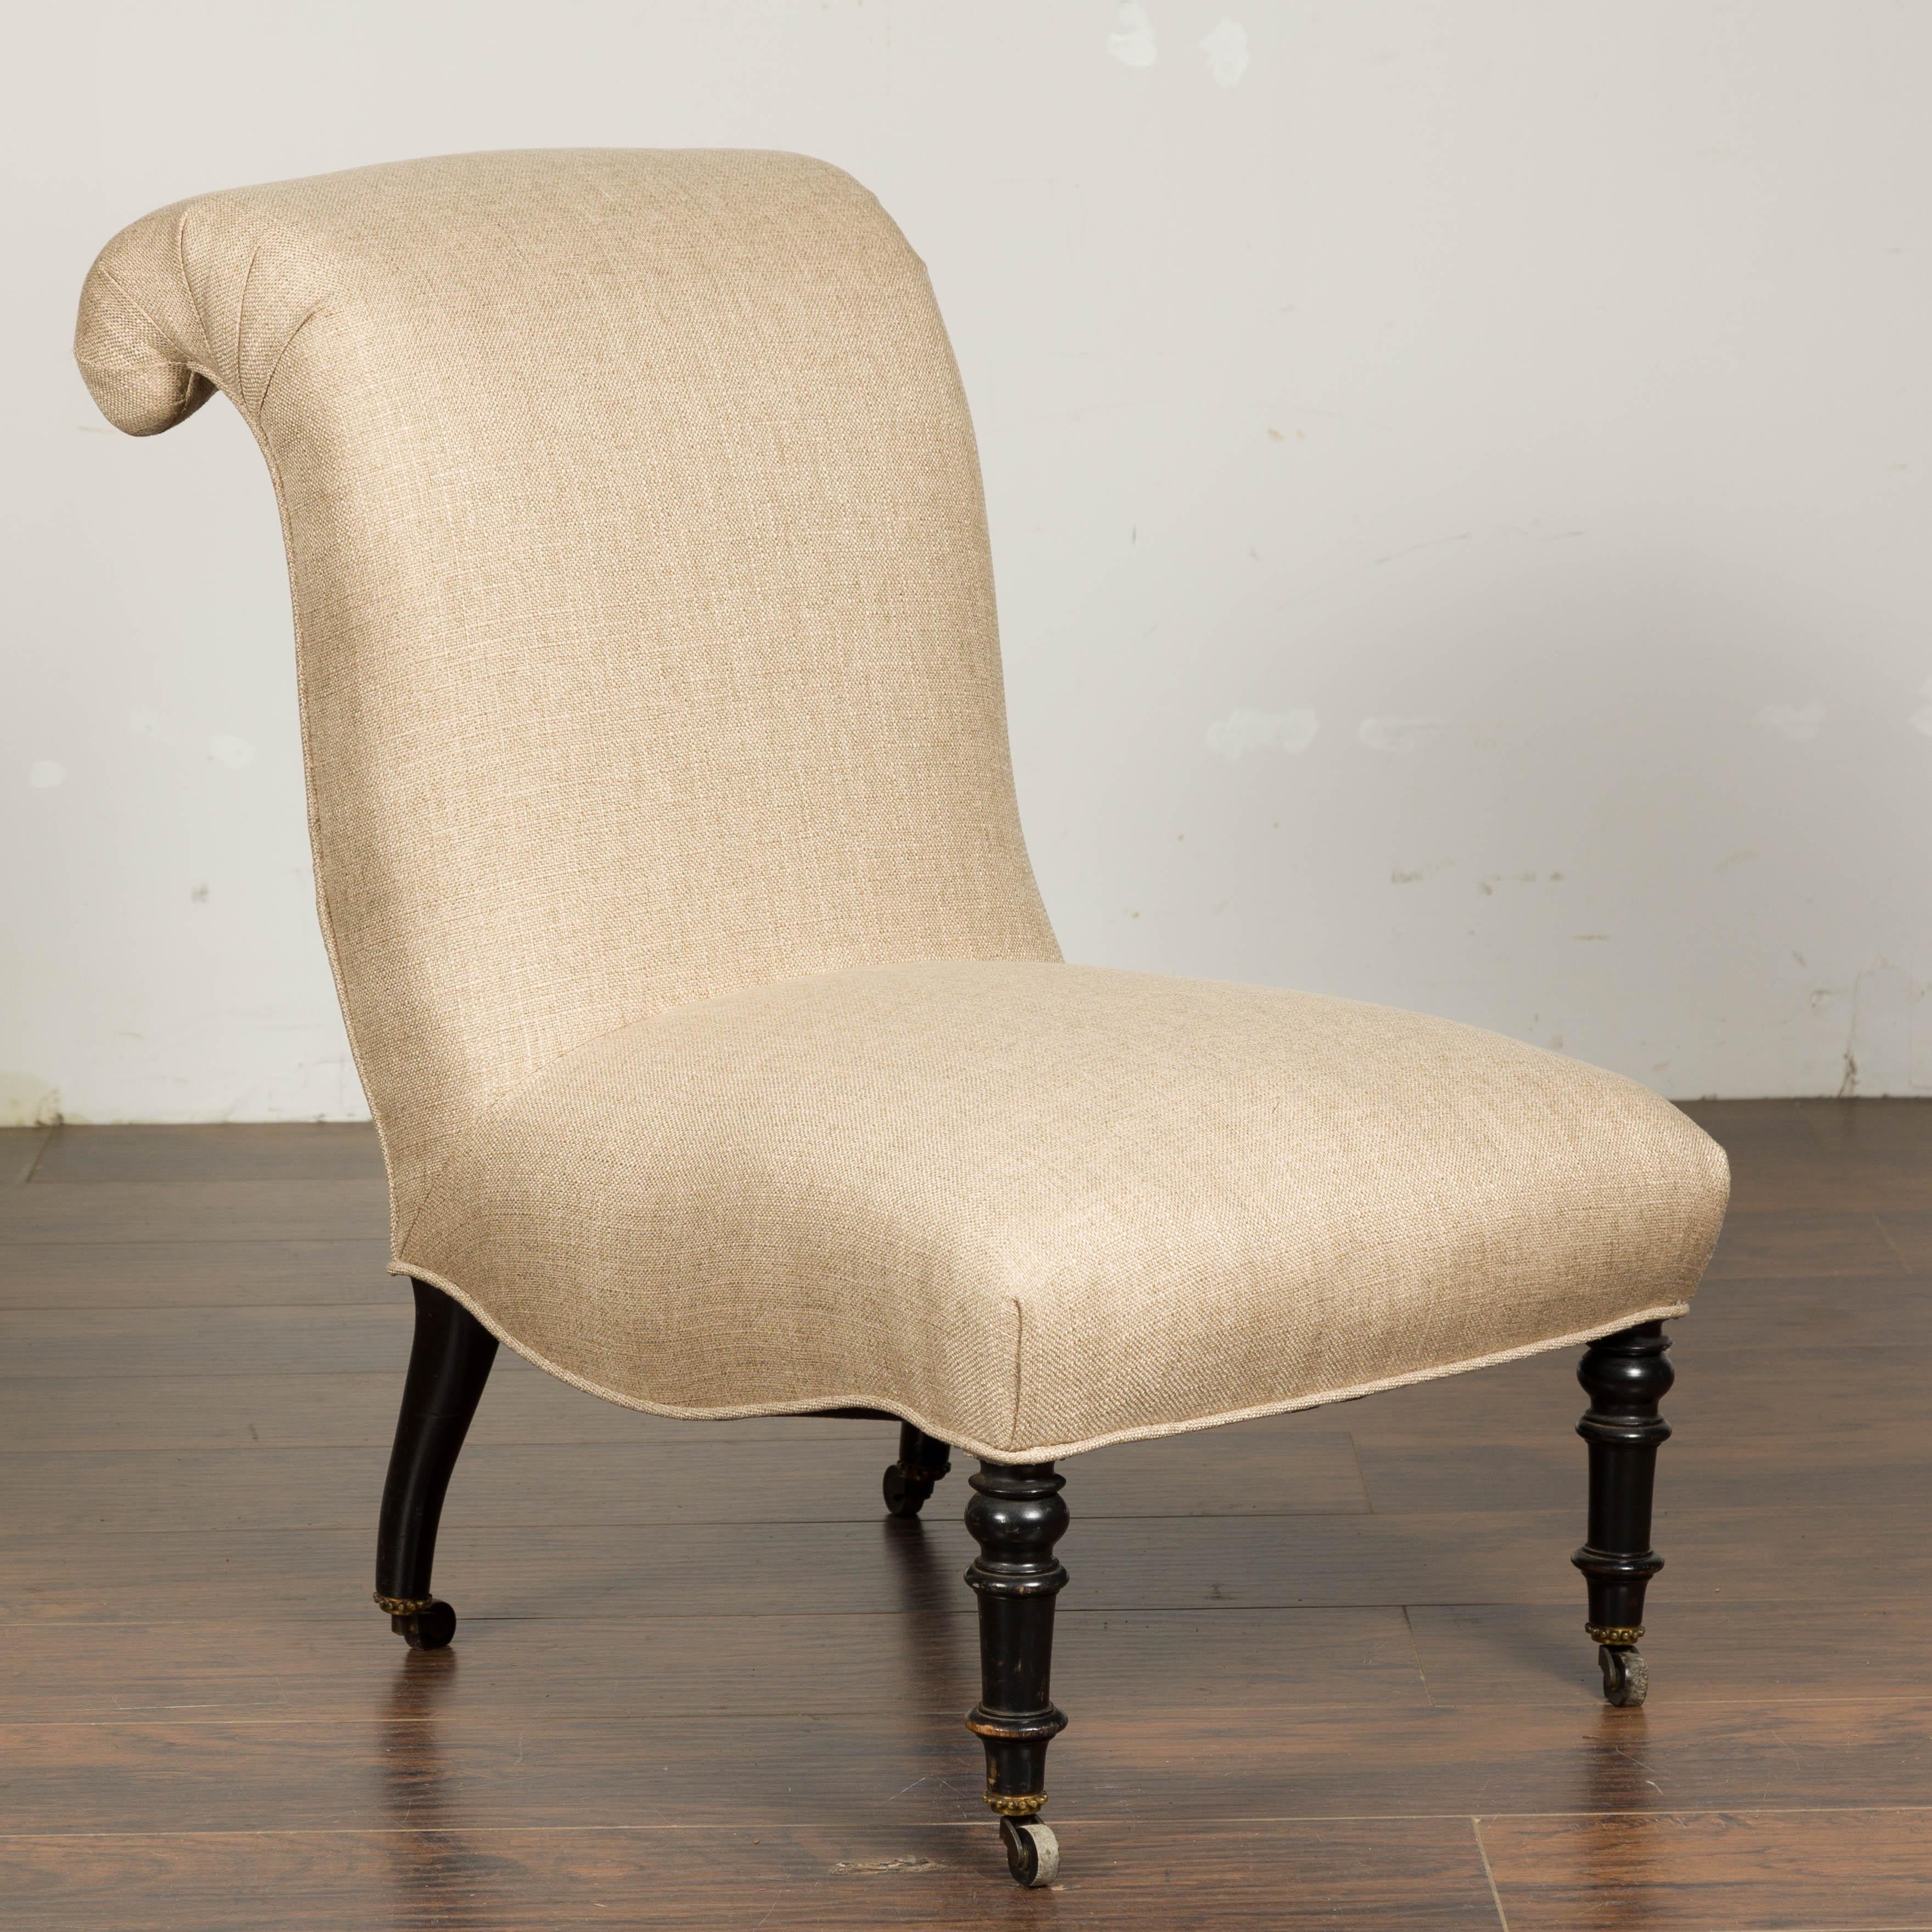 Upholstery 1900s Turn of the Century French Slipper Chair with Out-Scrolling Back For Sale